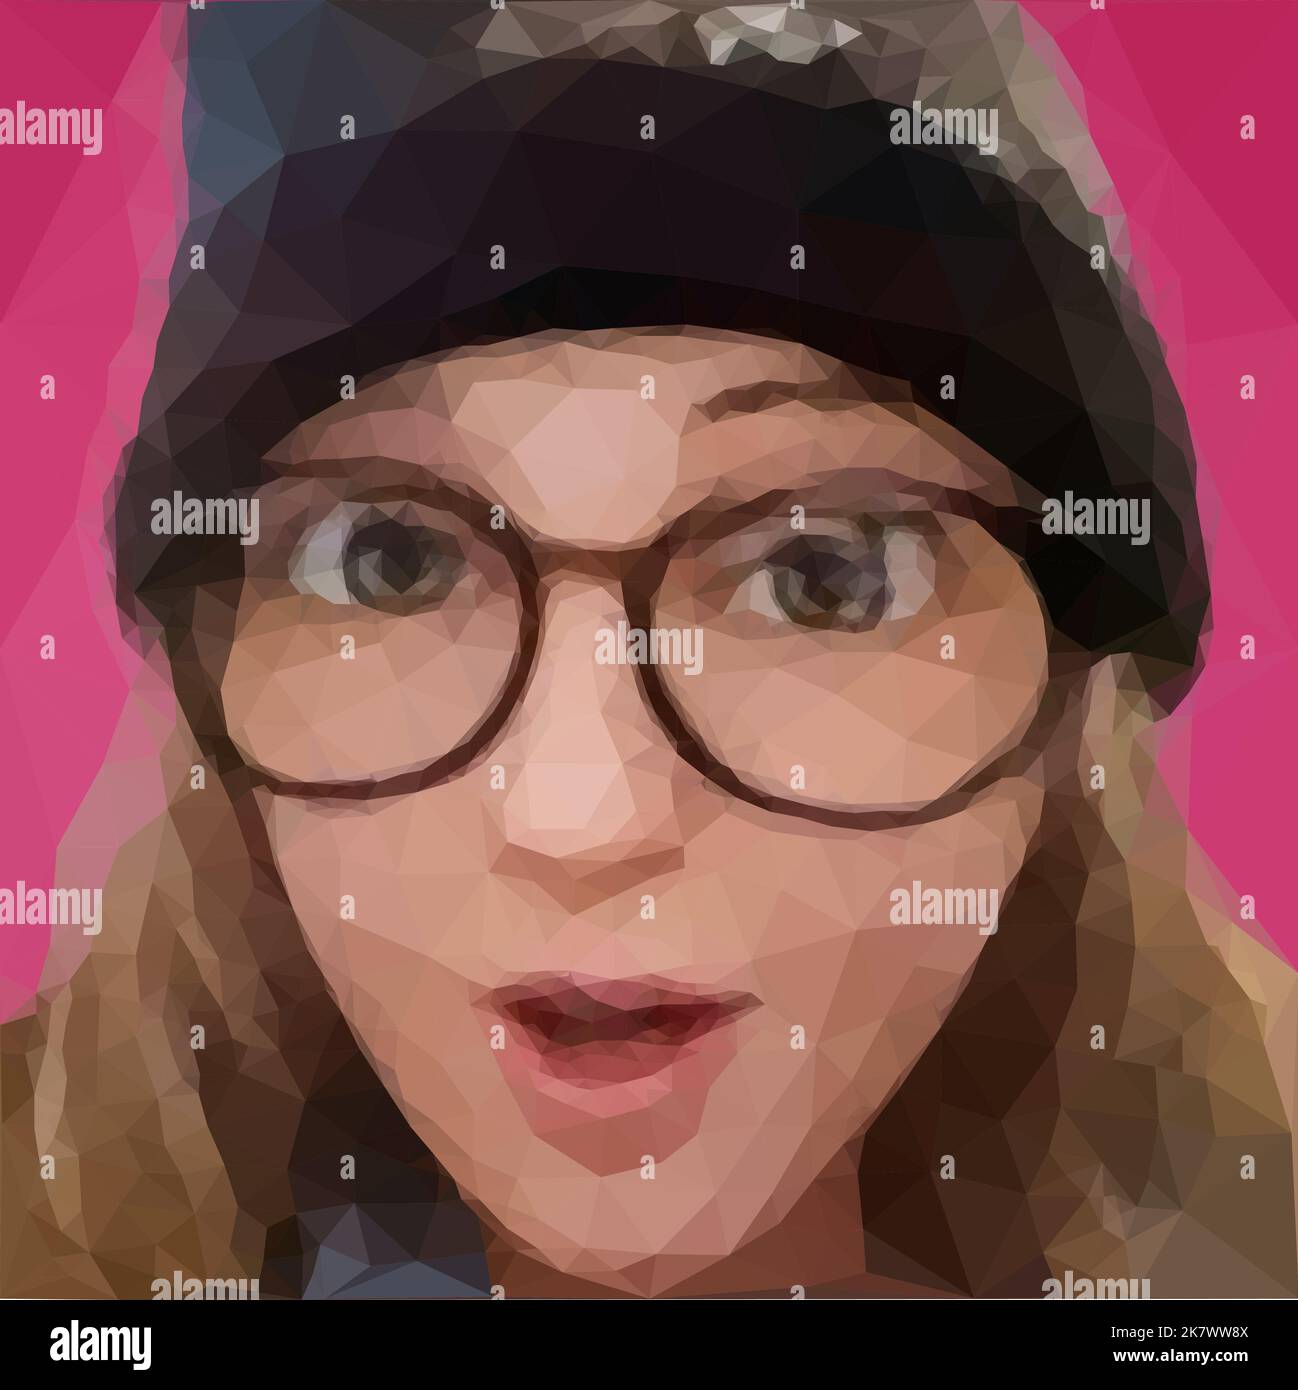 Cartoon of a girl looking amazed. She wears glasses and a cap with sequins. Her mouth forms an O. Illustration vector in low poly art. Stock Vector